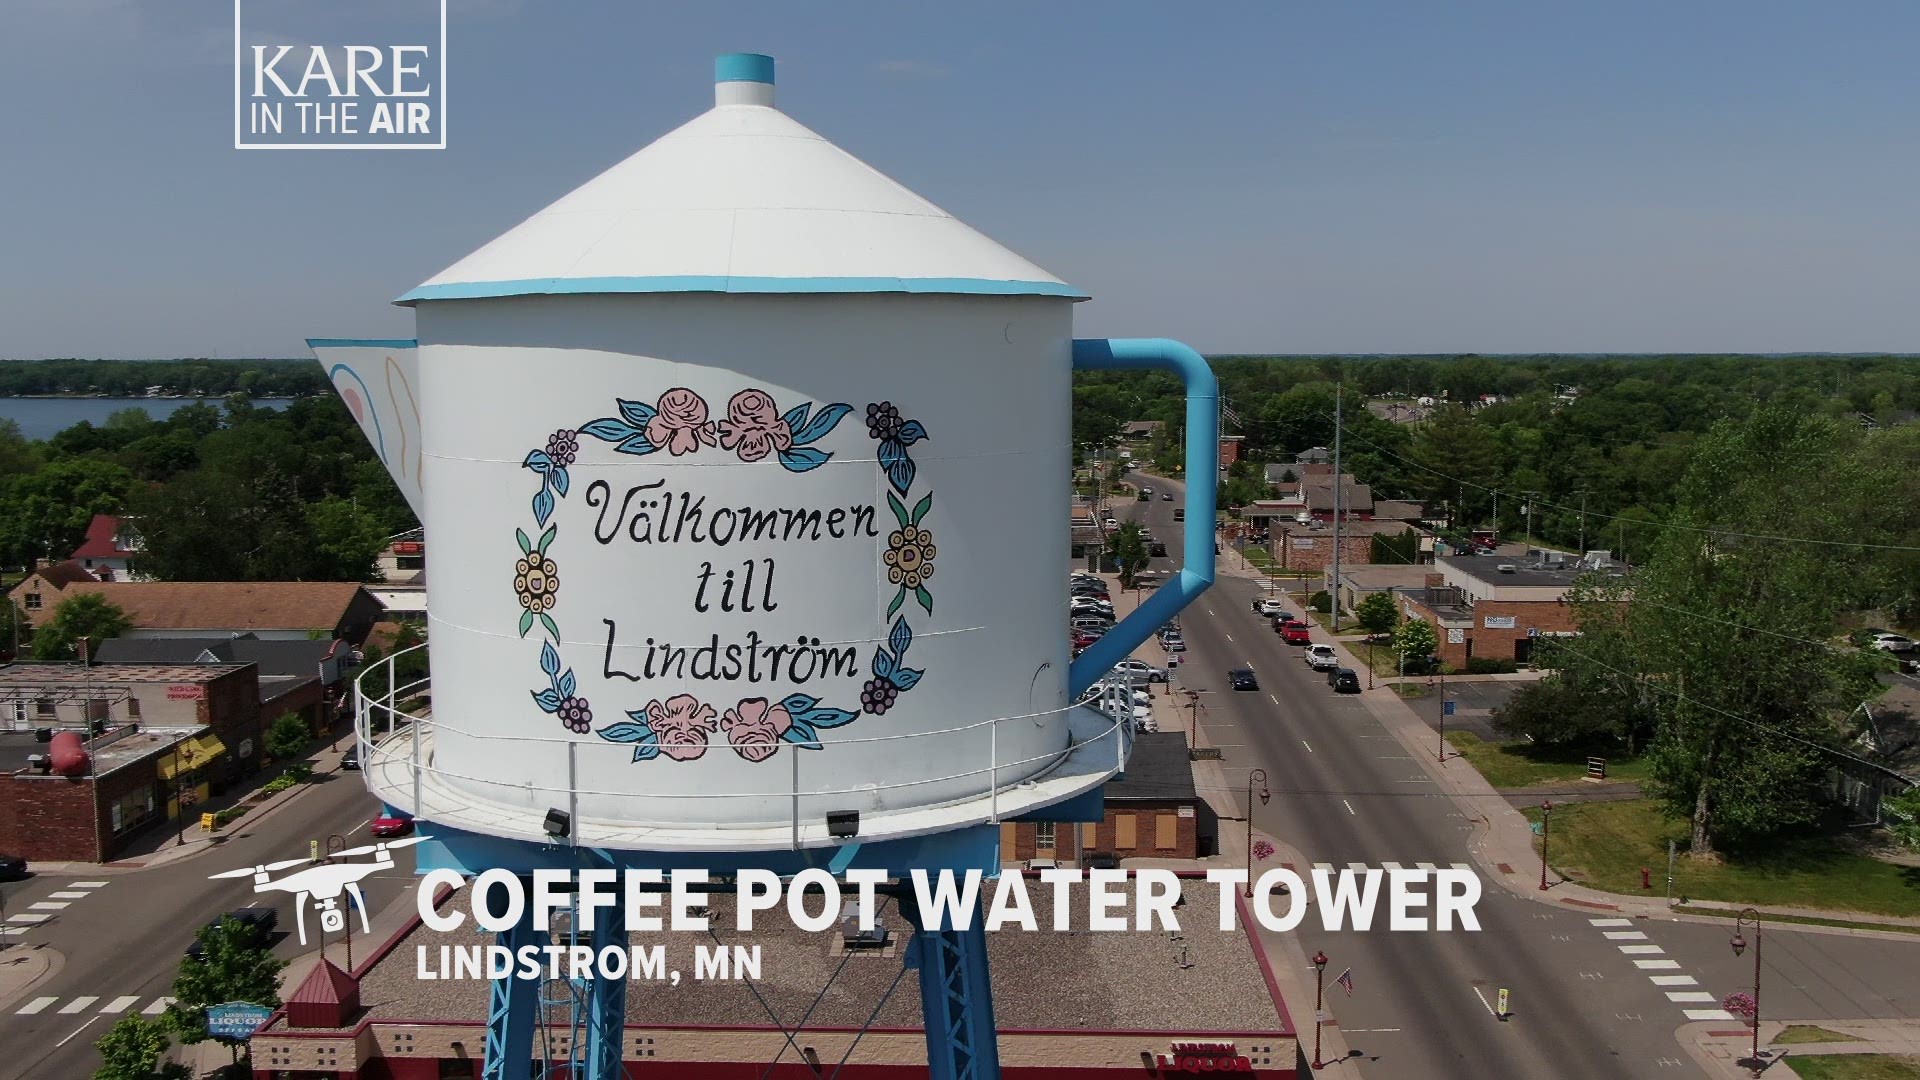 Our latest KARE in the Air installment takes us over Lindstrom for a look at the town's iconic coffee pot water tower.